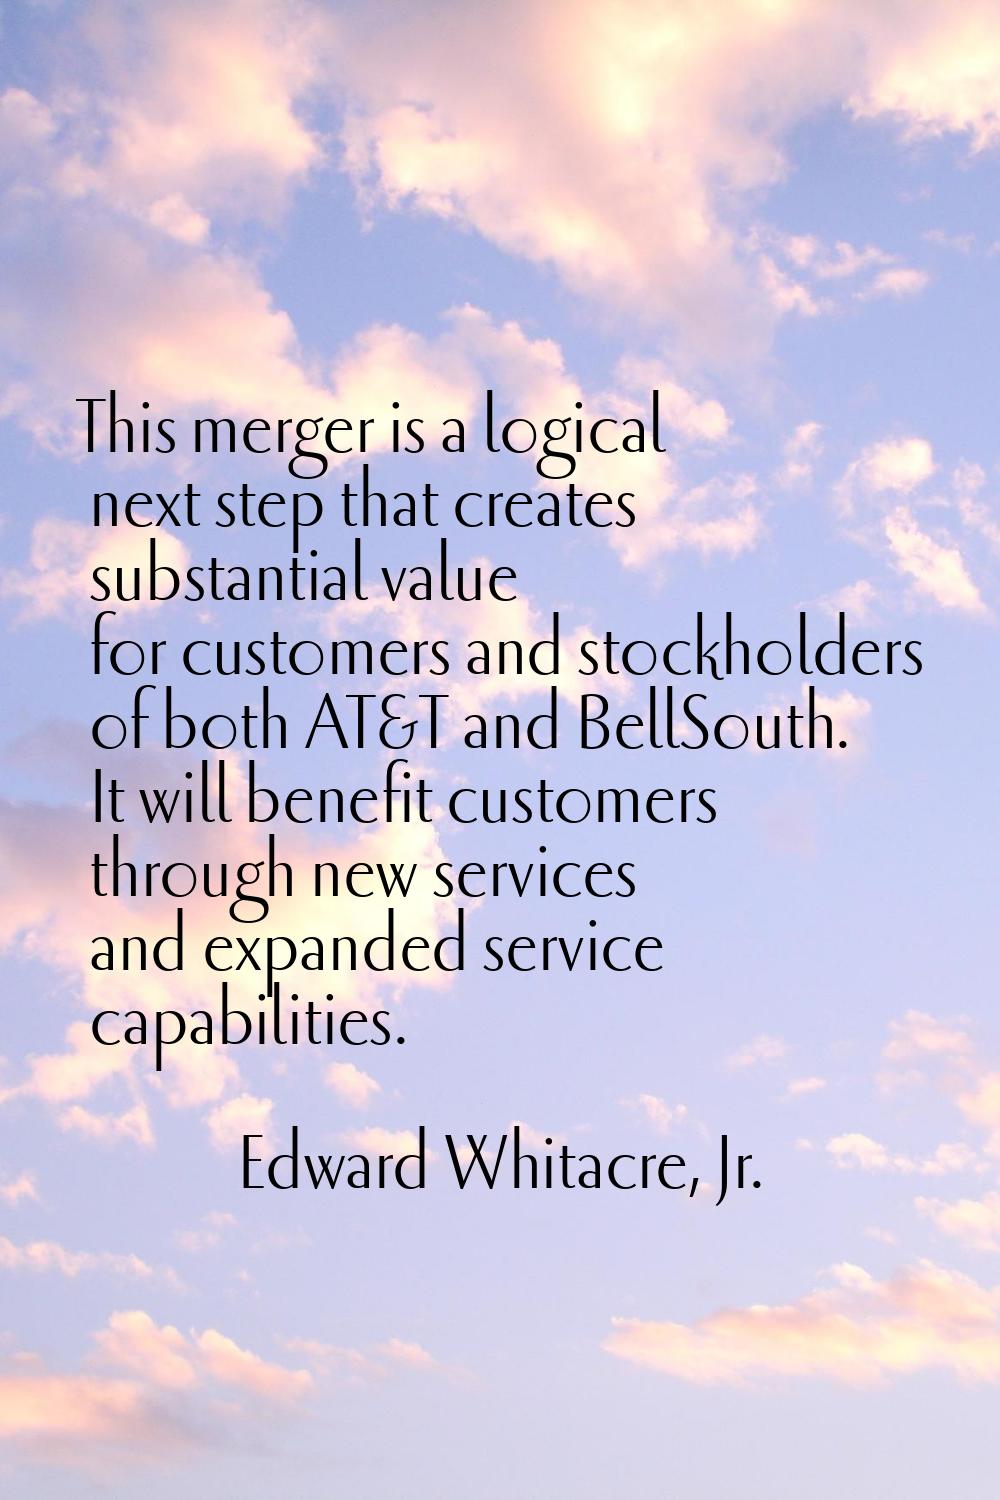 This merger is a logical next step that creates substantial value for customers and stockholders of